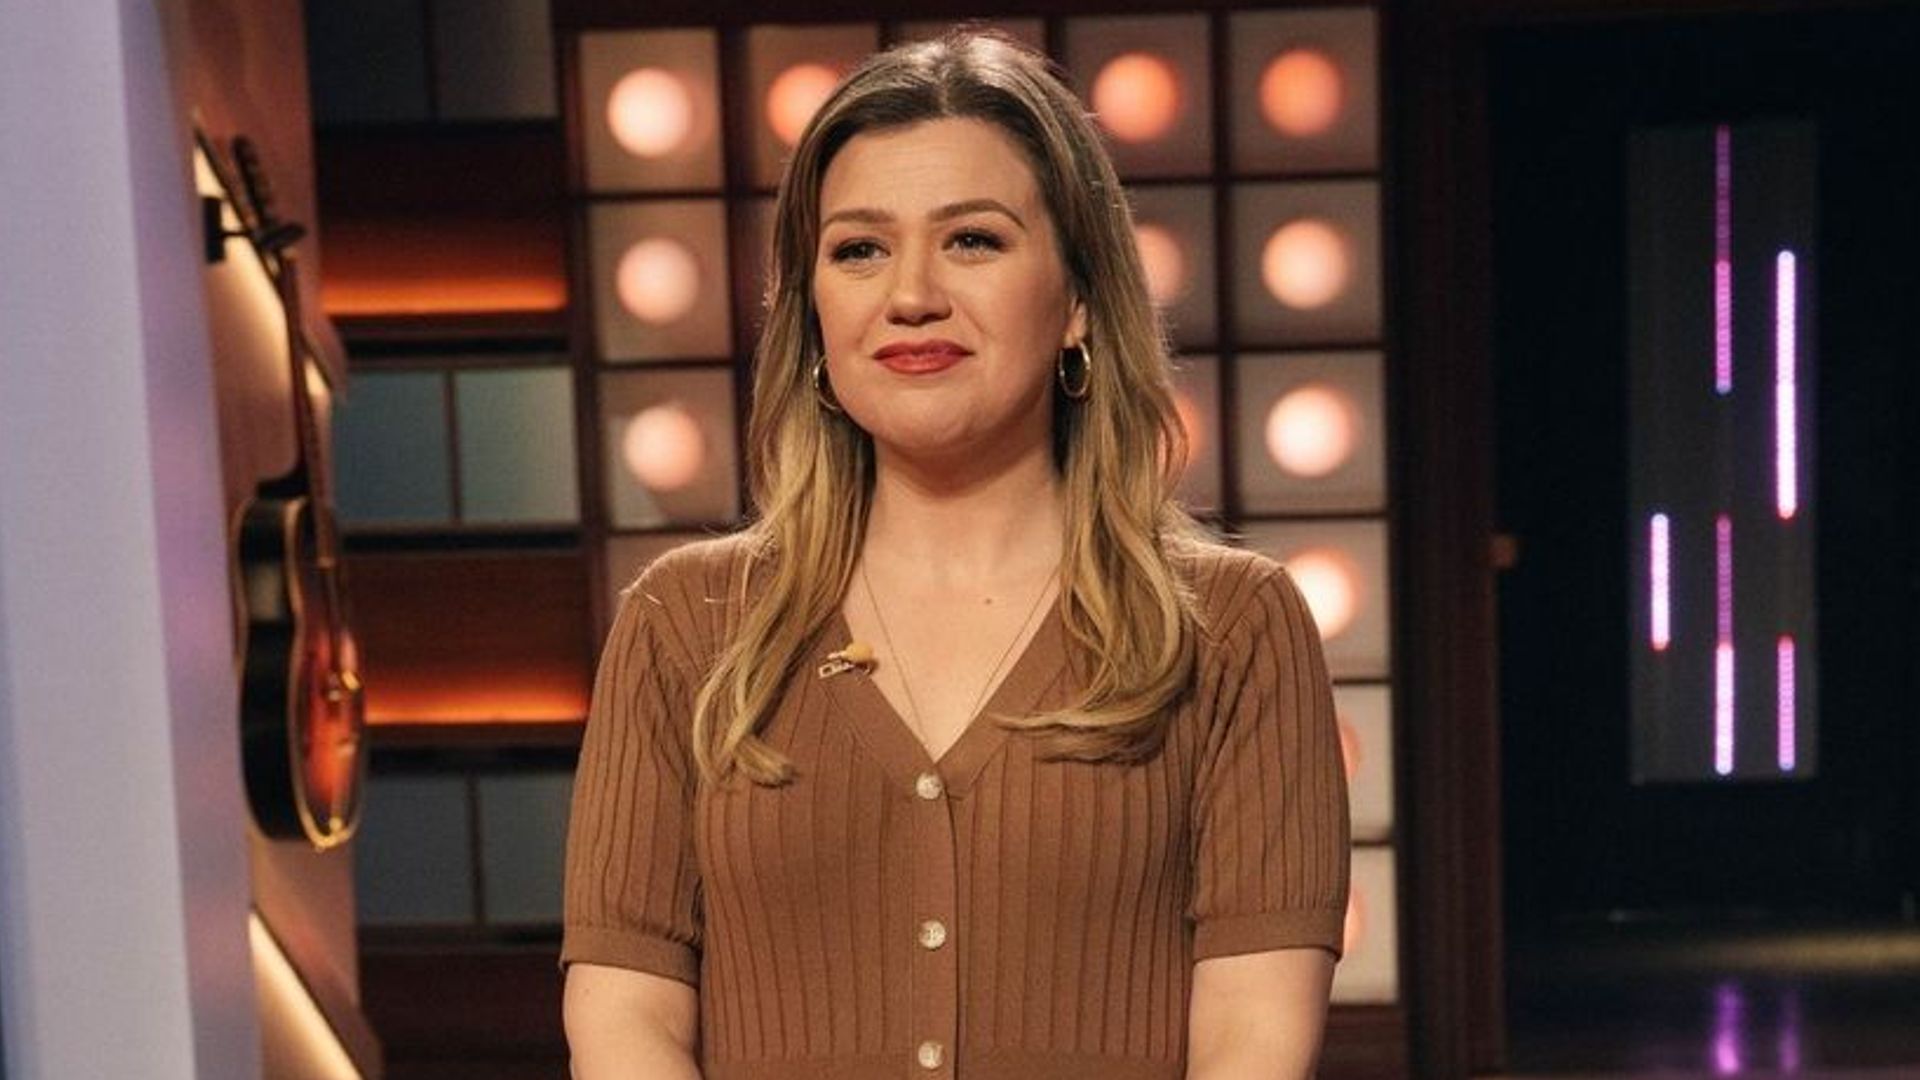 Kelly Clarkson turns 42 — see how she's transformed in just one year